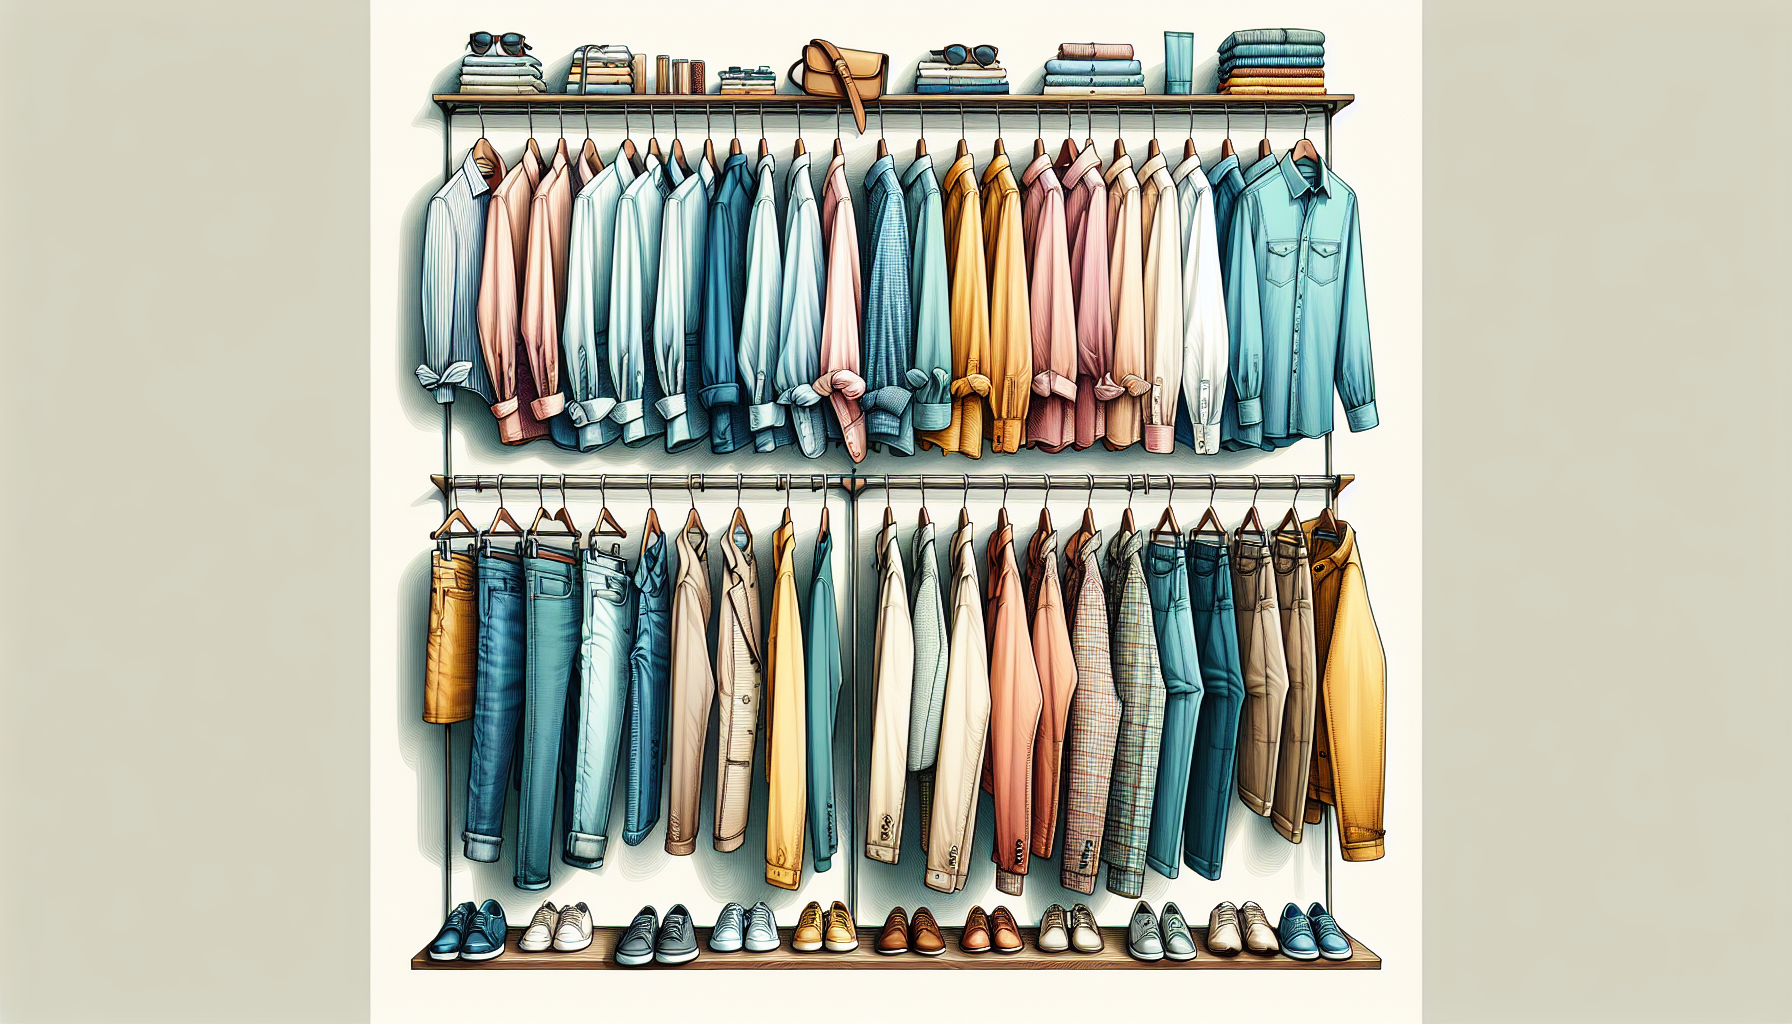 Illustration of various clothing items hanging on wall-mounted clothing rods